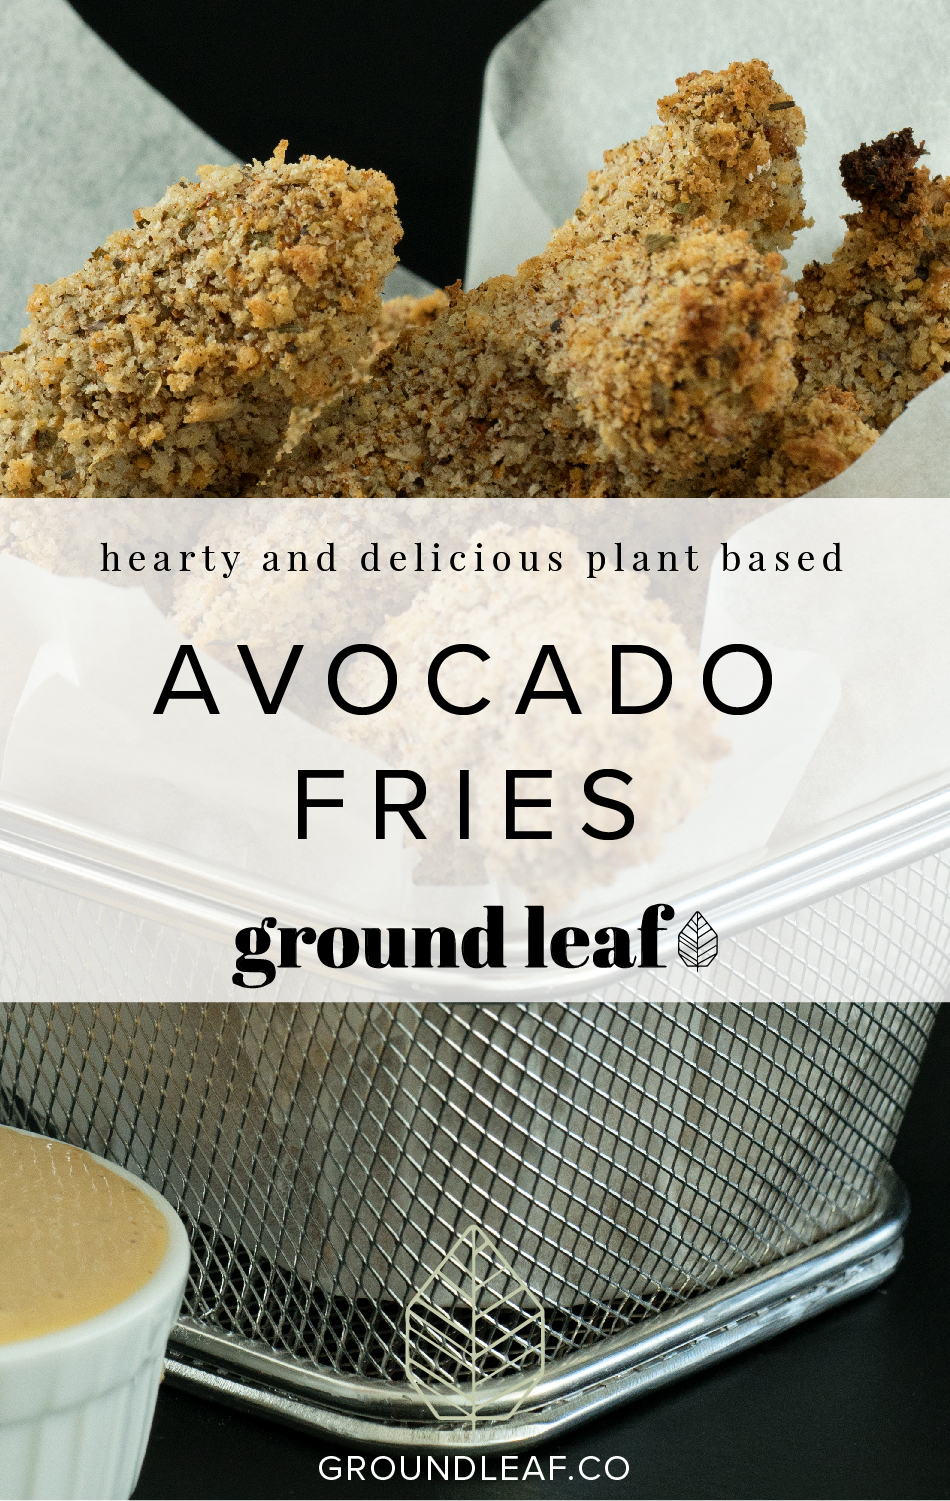 Learn how to make delicious avocado fries with this easy recipe! Video included!